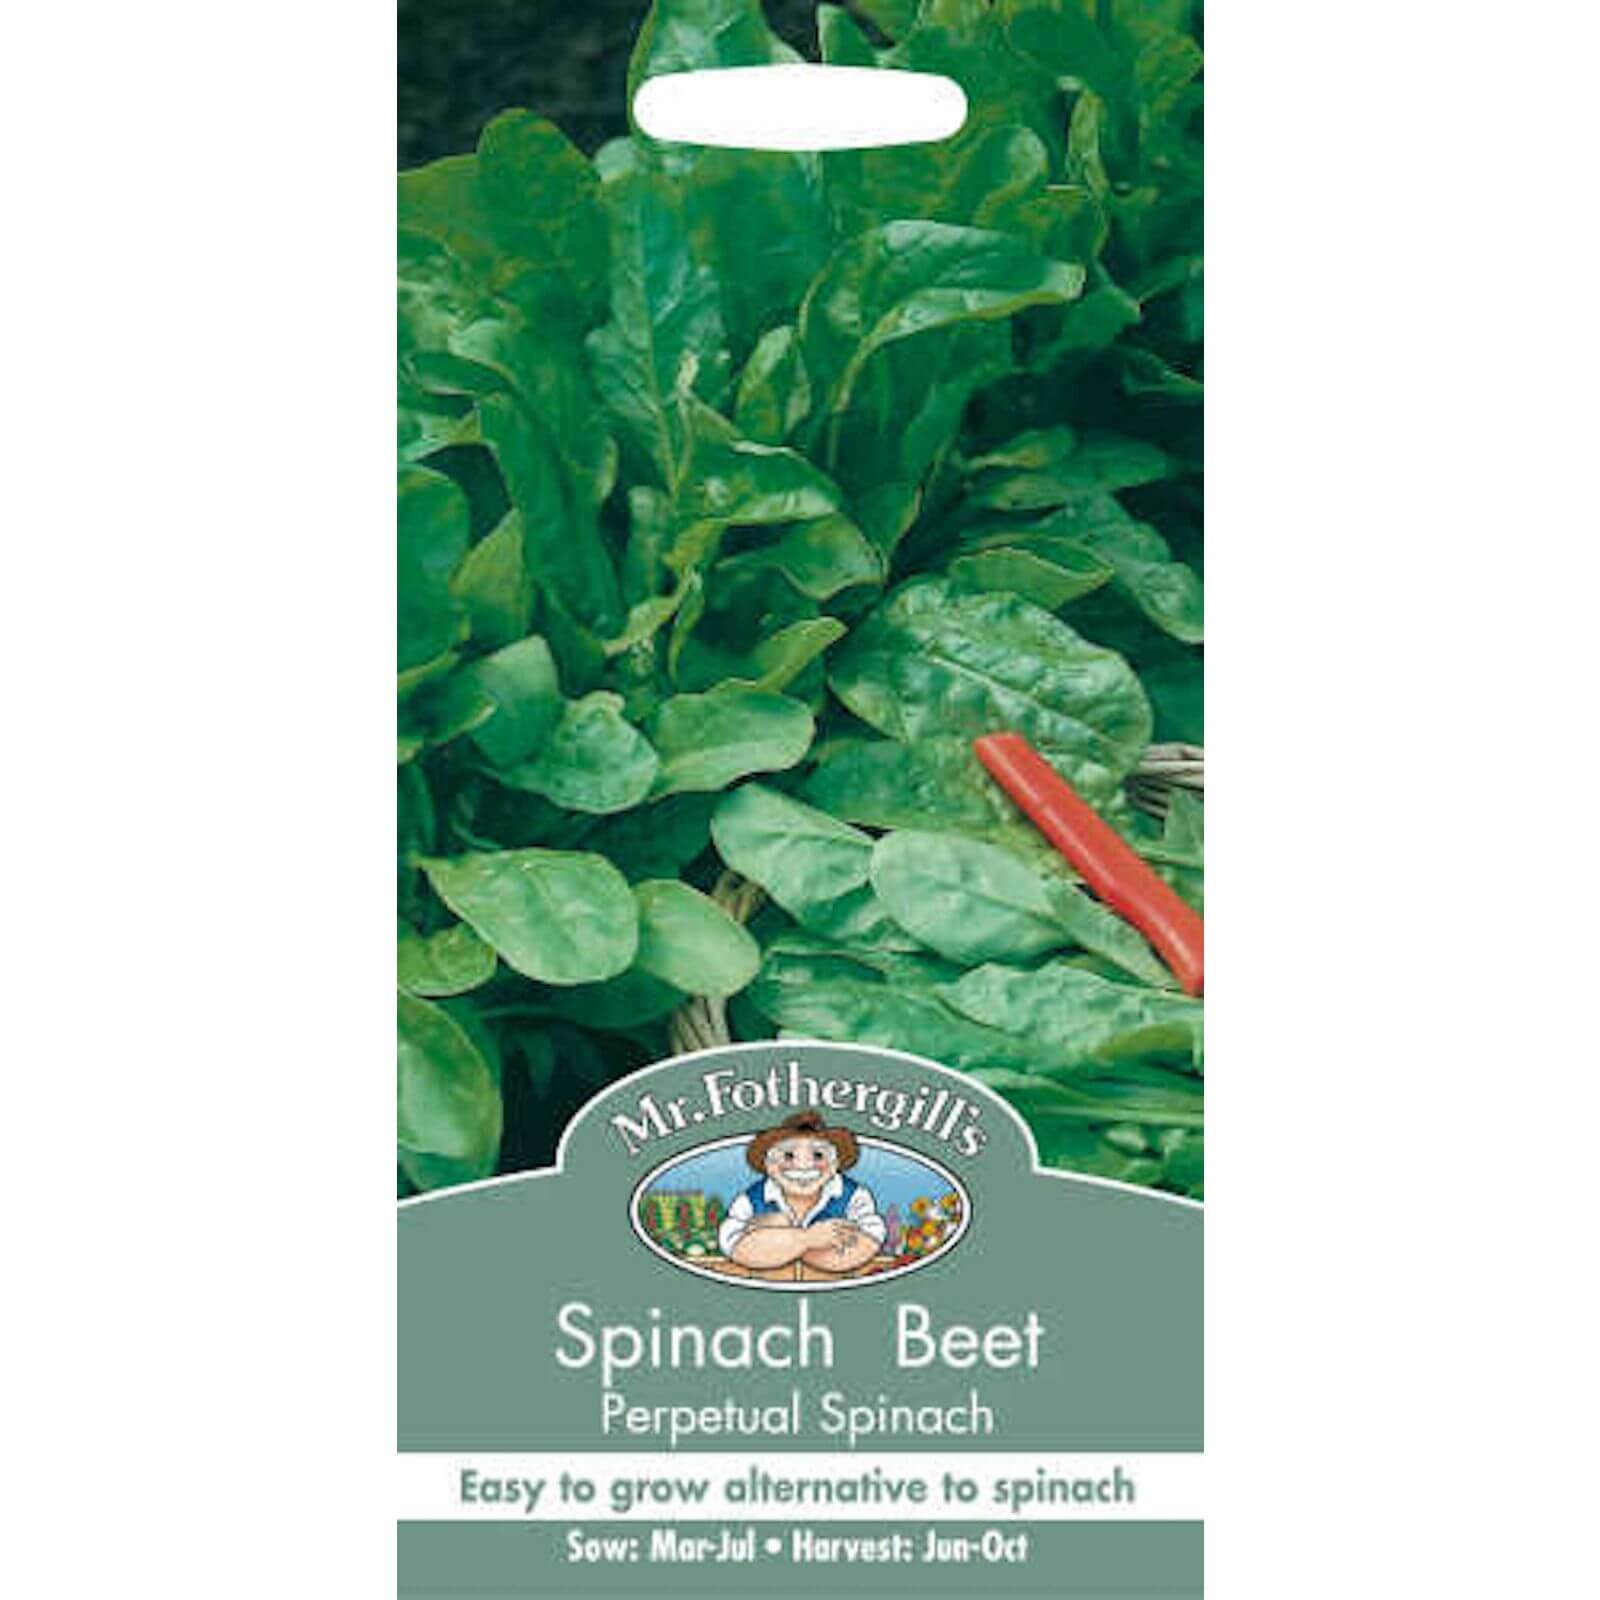 Mr. Fothergill's Spinach Beet Perpetual Spinach (Beta Vulgaris) Seeds